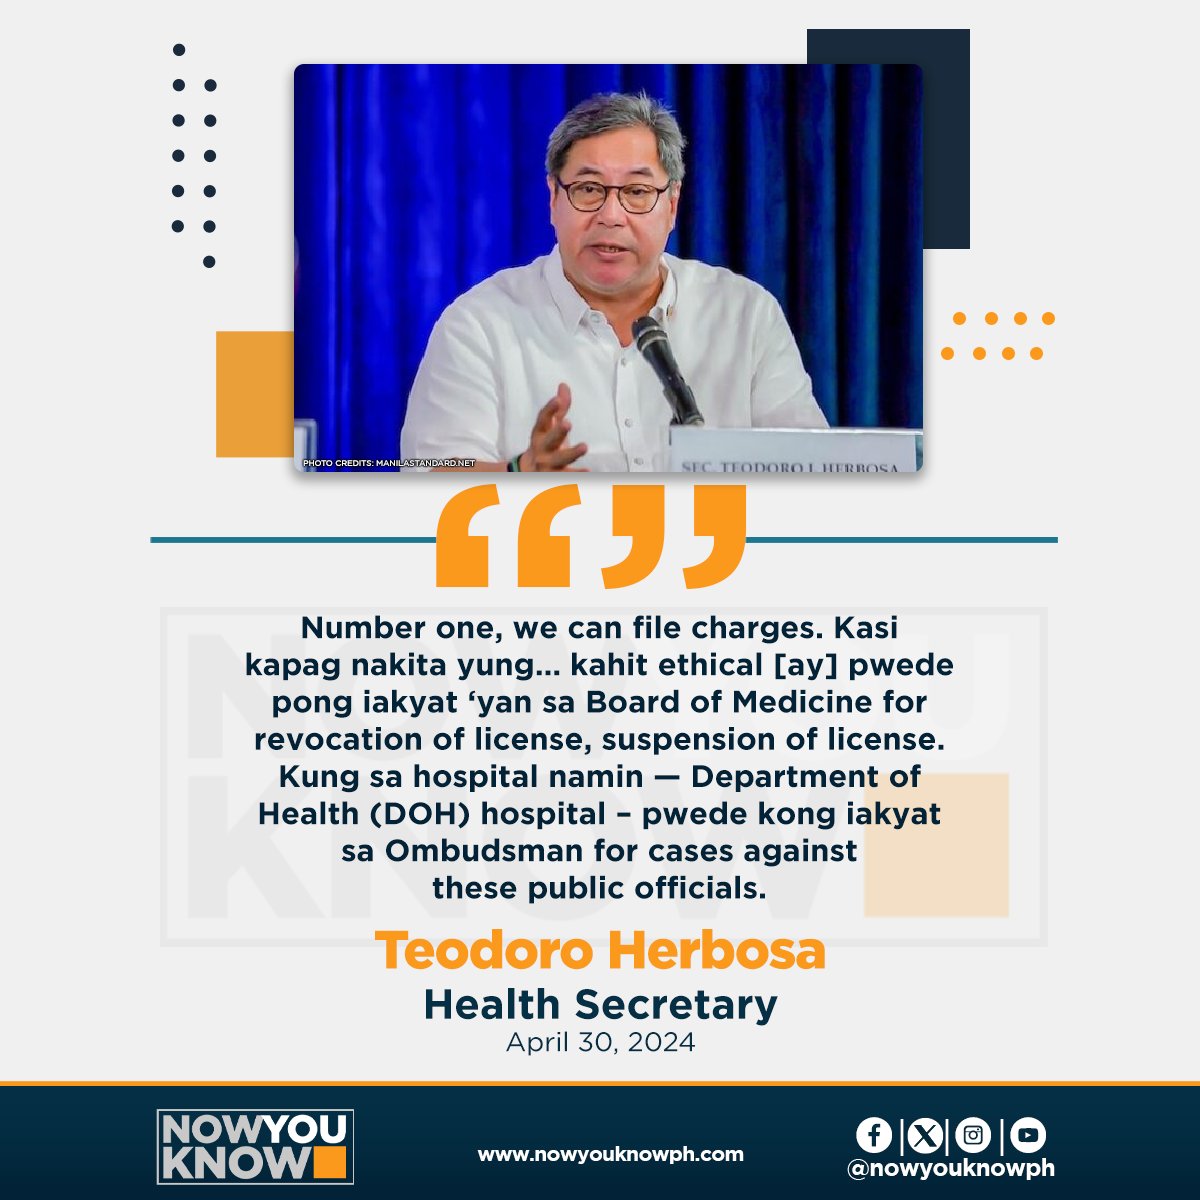 Apart from the revocation of their licenses, medical experts confirmed to be engaging in multi-level marketing schemes with pharmaceutical companies may also face charges, according to Health Secretary Ted Herbosa. READ: tinyurl.com/4xmepfw5 📰Inquirer.net